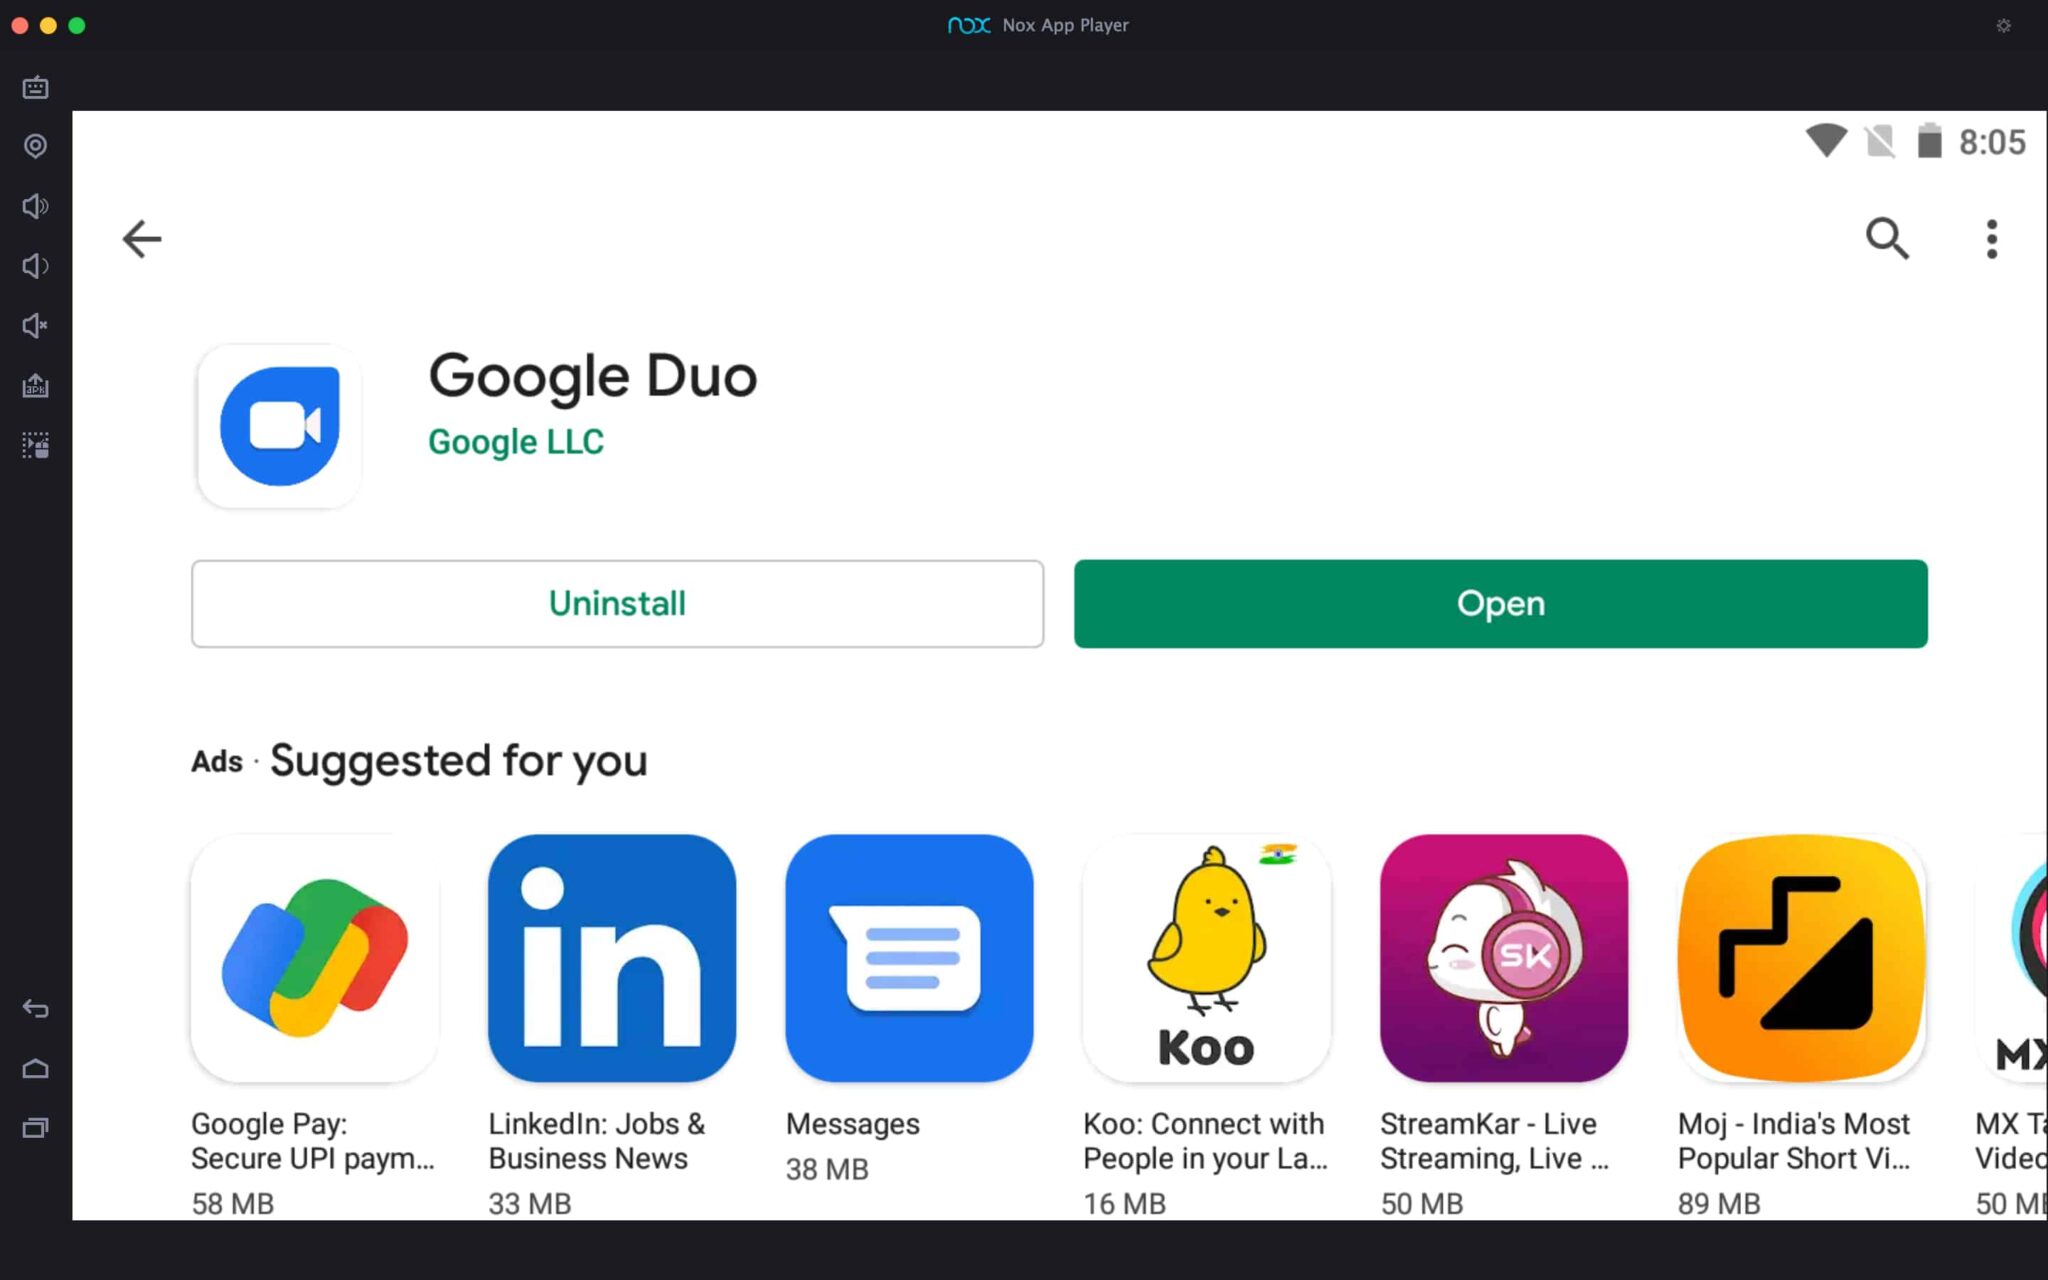 google duo for pc download windows 10